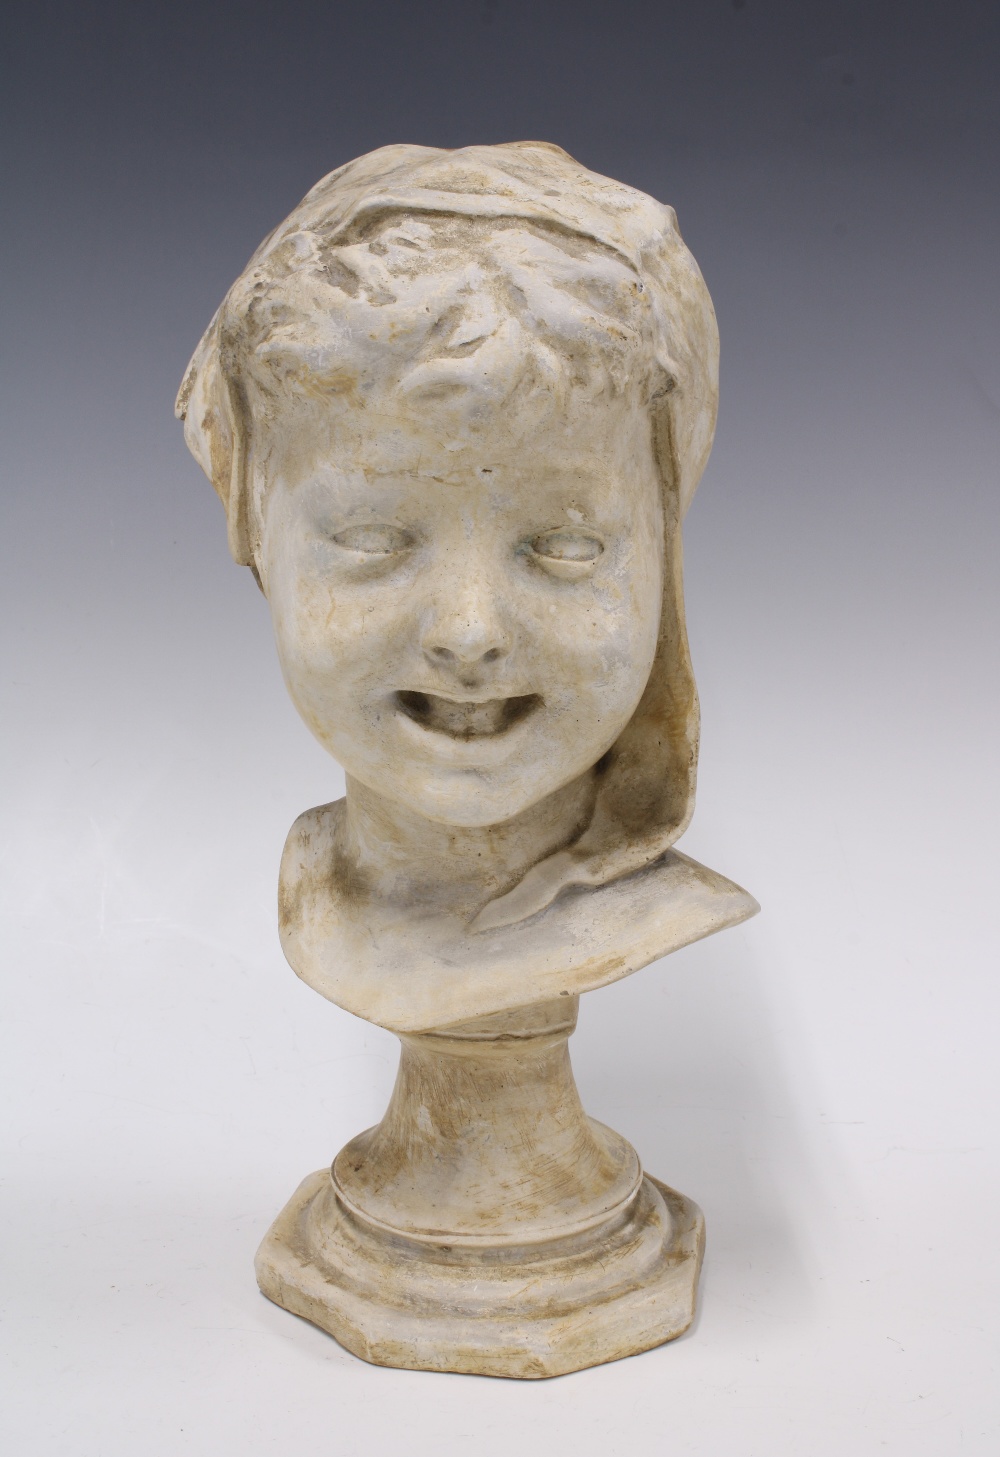 Head of a child modelled in plaster on a socle base, 19 x 35cm